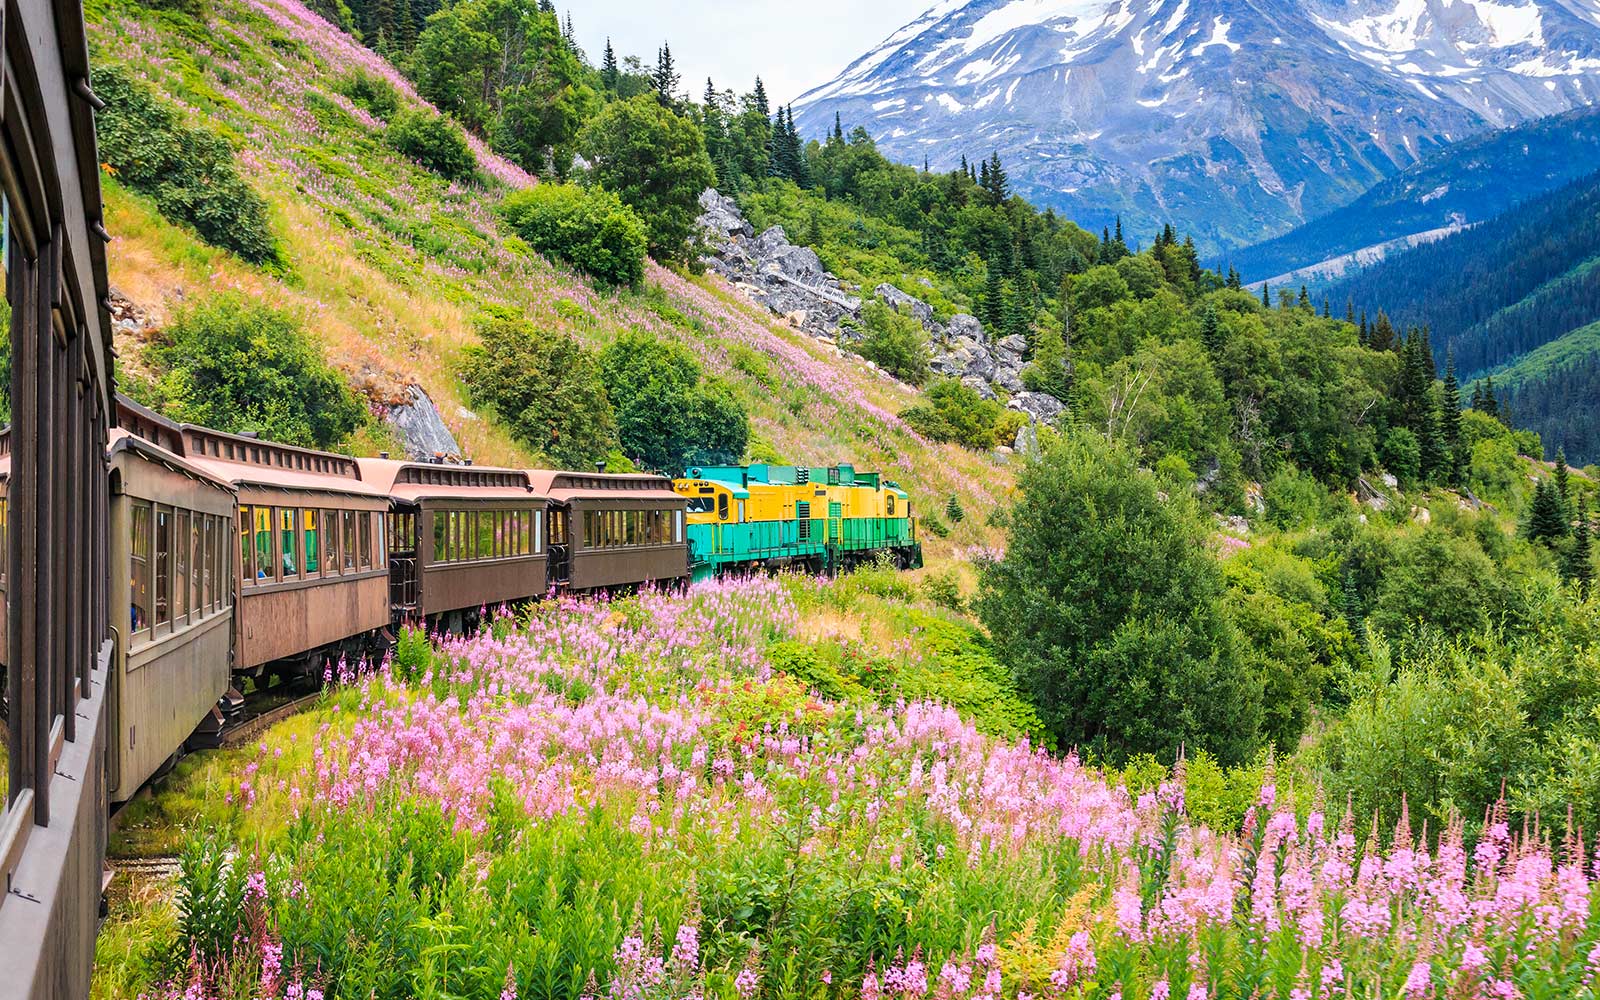 USA Today Travel: Dinner trains delight rail fans, foodies alike